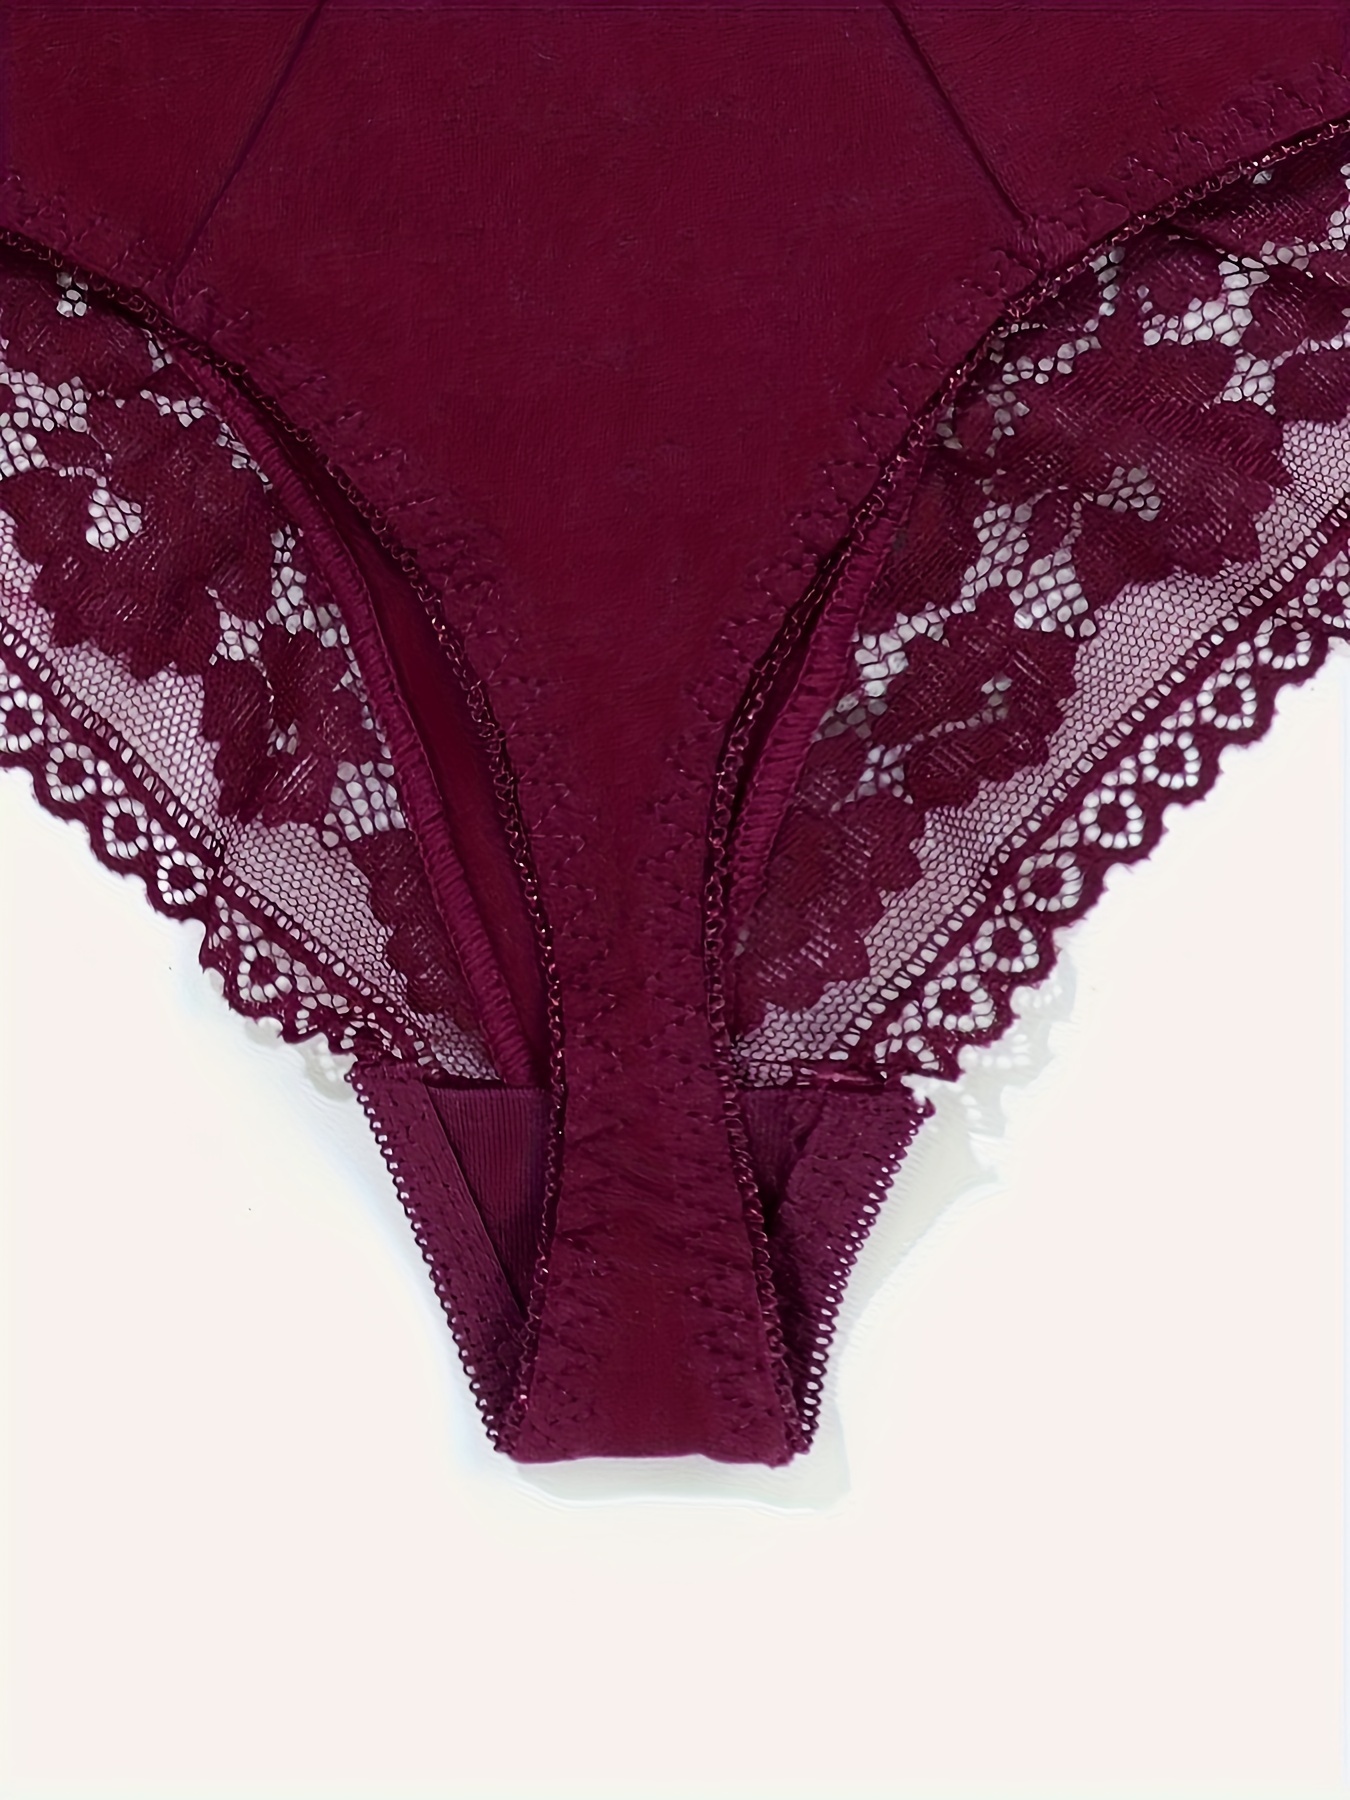 6 Pack Of Lace Panties For Women. Soft Stretch Hipster. Sexy Cheeky  Underwear S-3xl